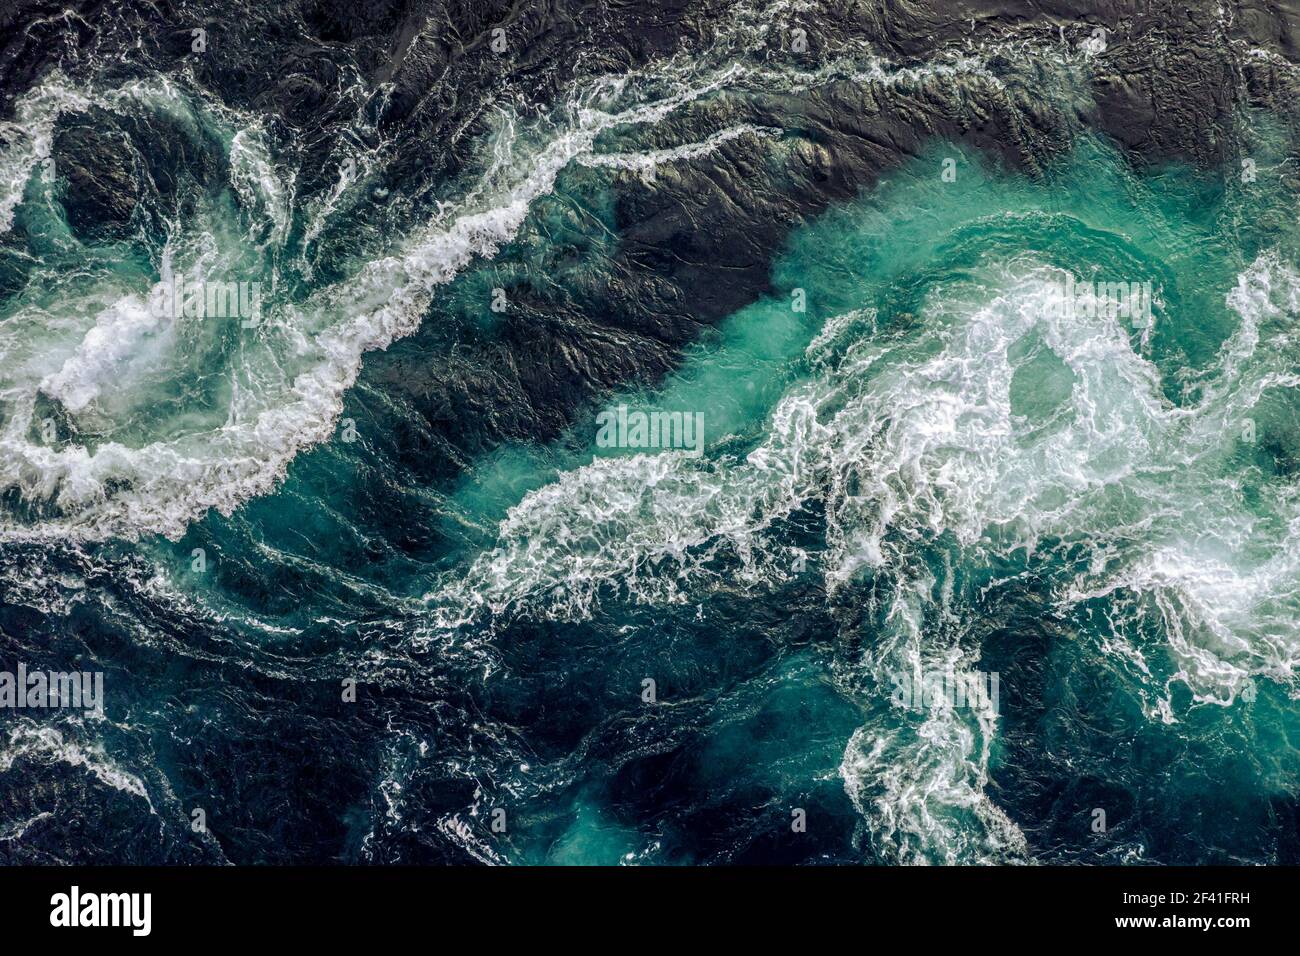 https://c8.alamy.com/comp/2F41FRH/abstract-background-waves-of-water-of-the-river-and-the-sea-meet-each-other-during-high-tide-and-low-tide-whirlpools-of-the-maelstrom-of-saltstraumen-nordland-norway-2F41FRH.jpg